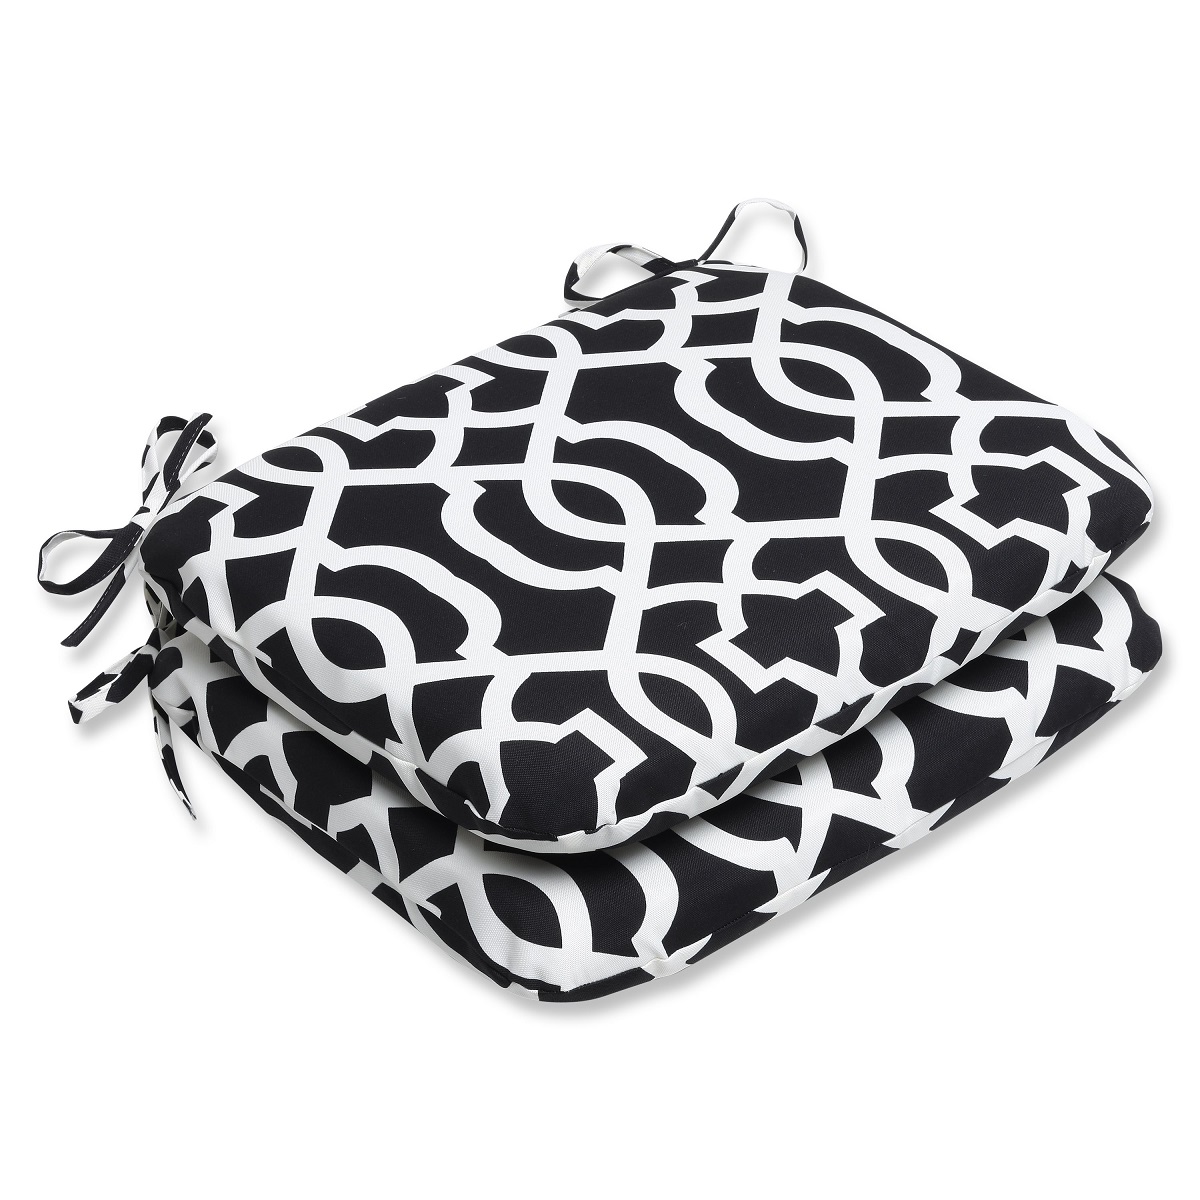 Pillow Perfect Set of 2 Black and White Geometric Outdoor Patio Rounded Chair Cushions 18.5"